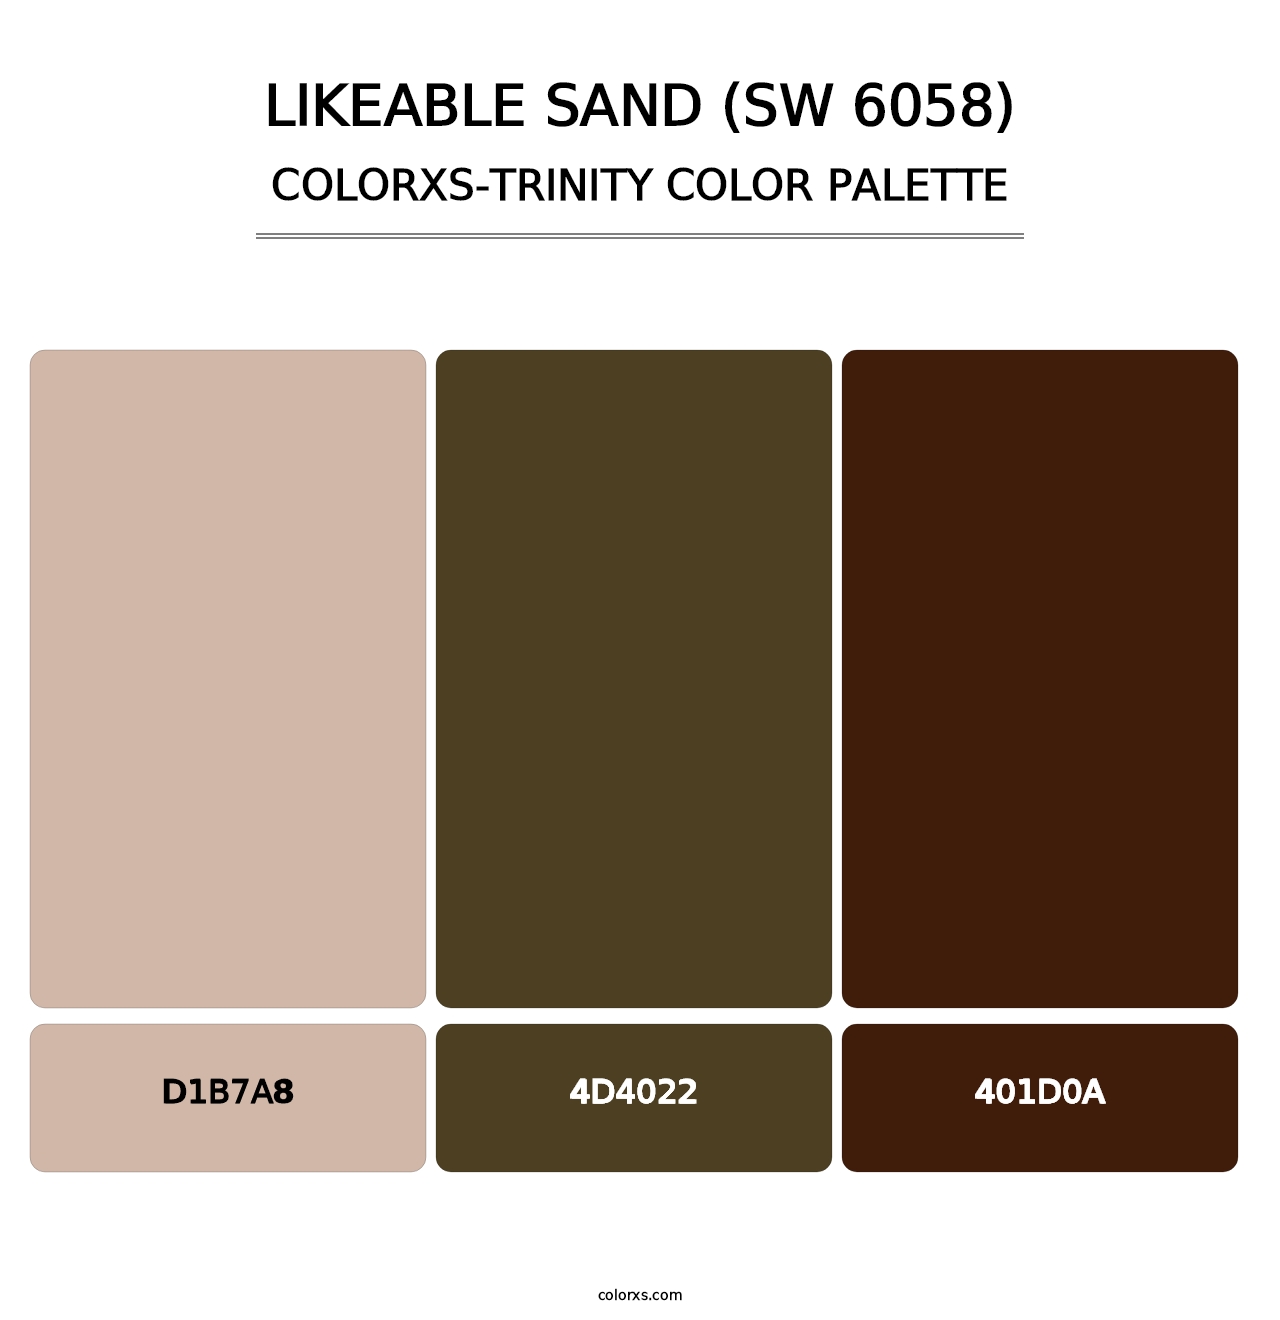 Likeable Sand (SW 6058) - Colorxs Trinity Palette